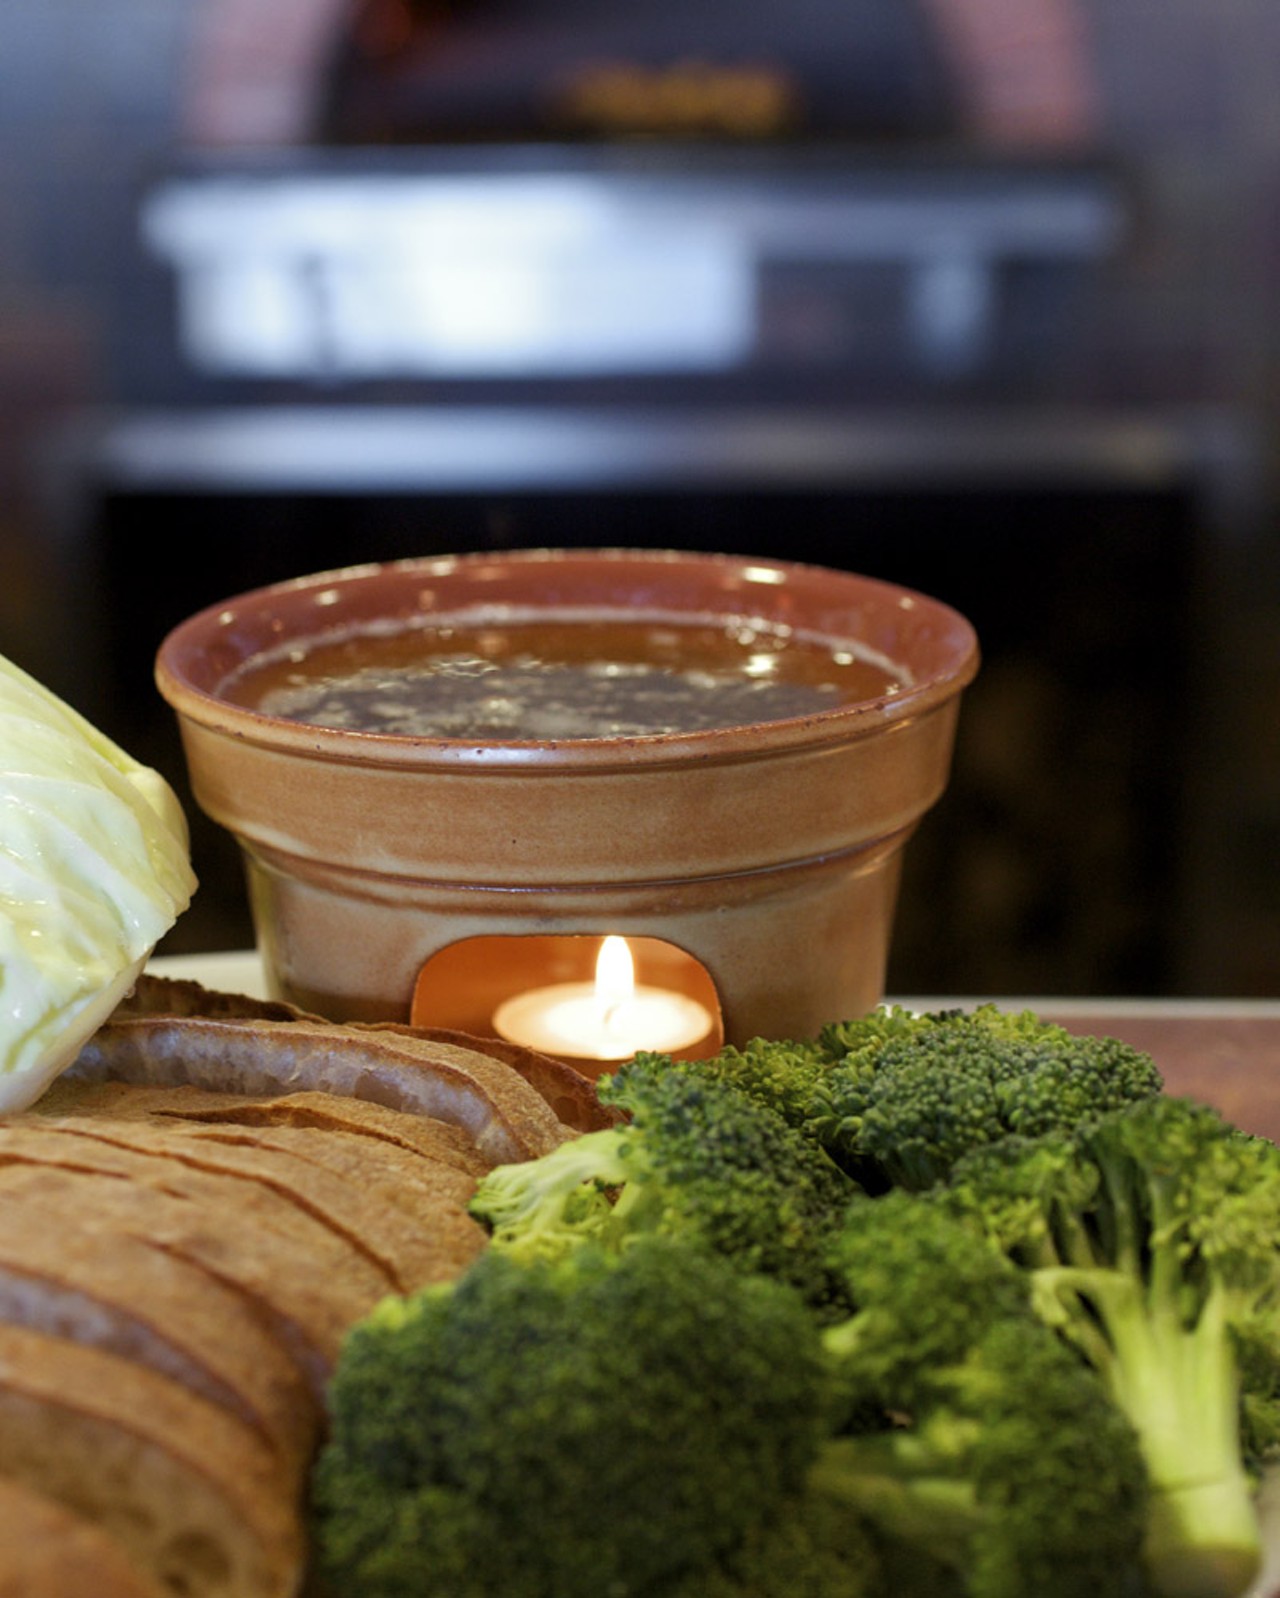 From the shared plates section of the menu, Bagna Cauda, from the Piedmonte region of Italy, is a cloay pot with a sizzling mix of butter, extra virgin olive oil, garlic, red pepper and anchovies and is served fondue style with crisp cabbage, broccoli and sliced ciabatta.